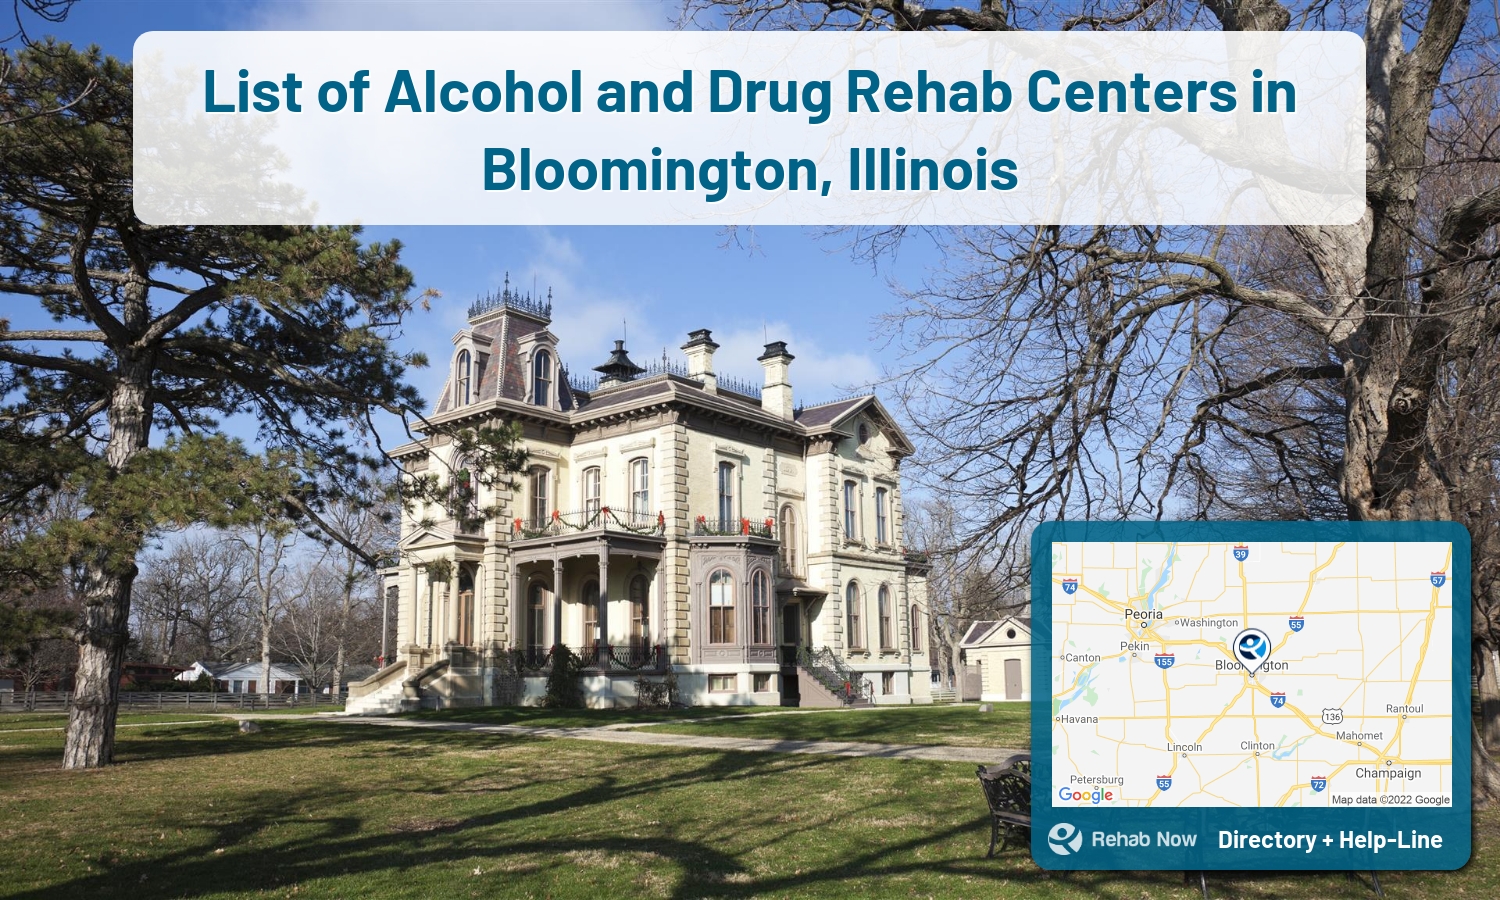 Our experts can help you find treatment now in Bloomington, Illinois. We list drug rehab and alcohol centers in Illinois.